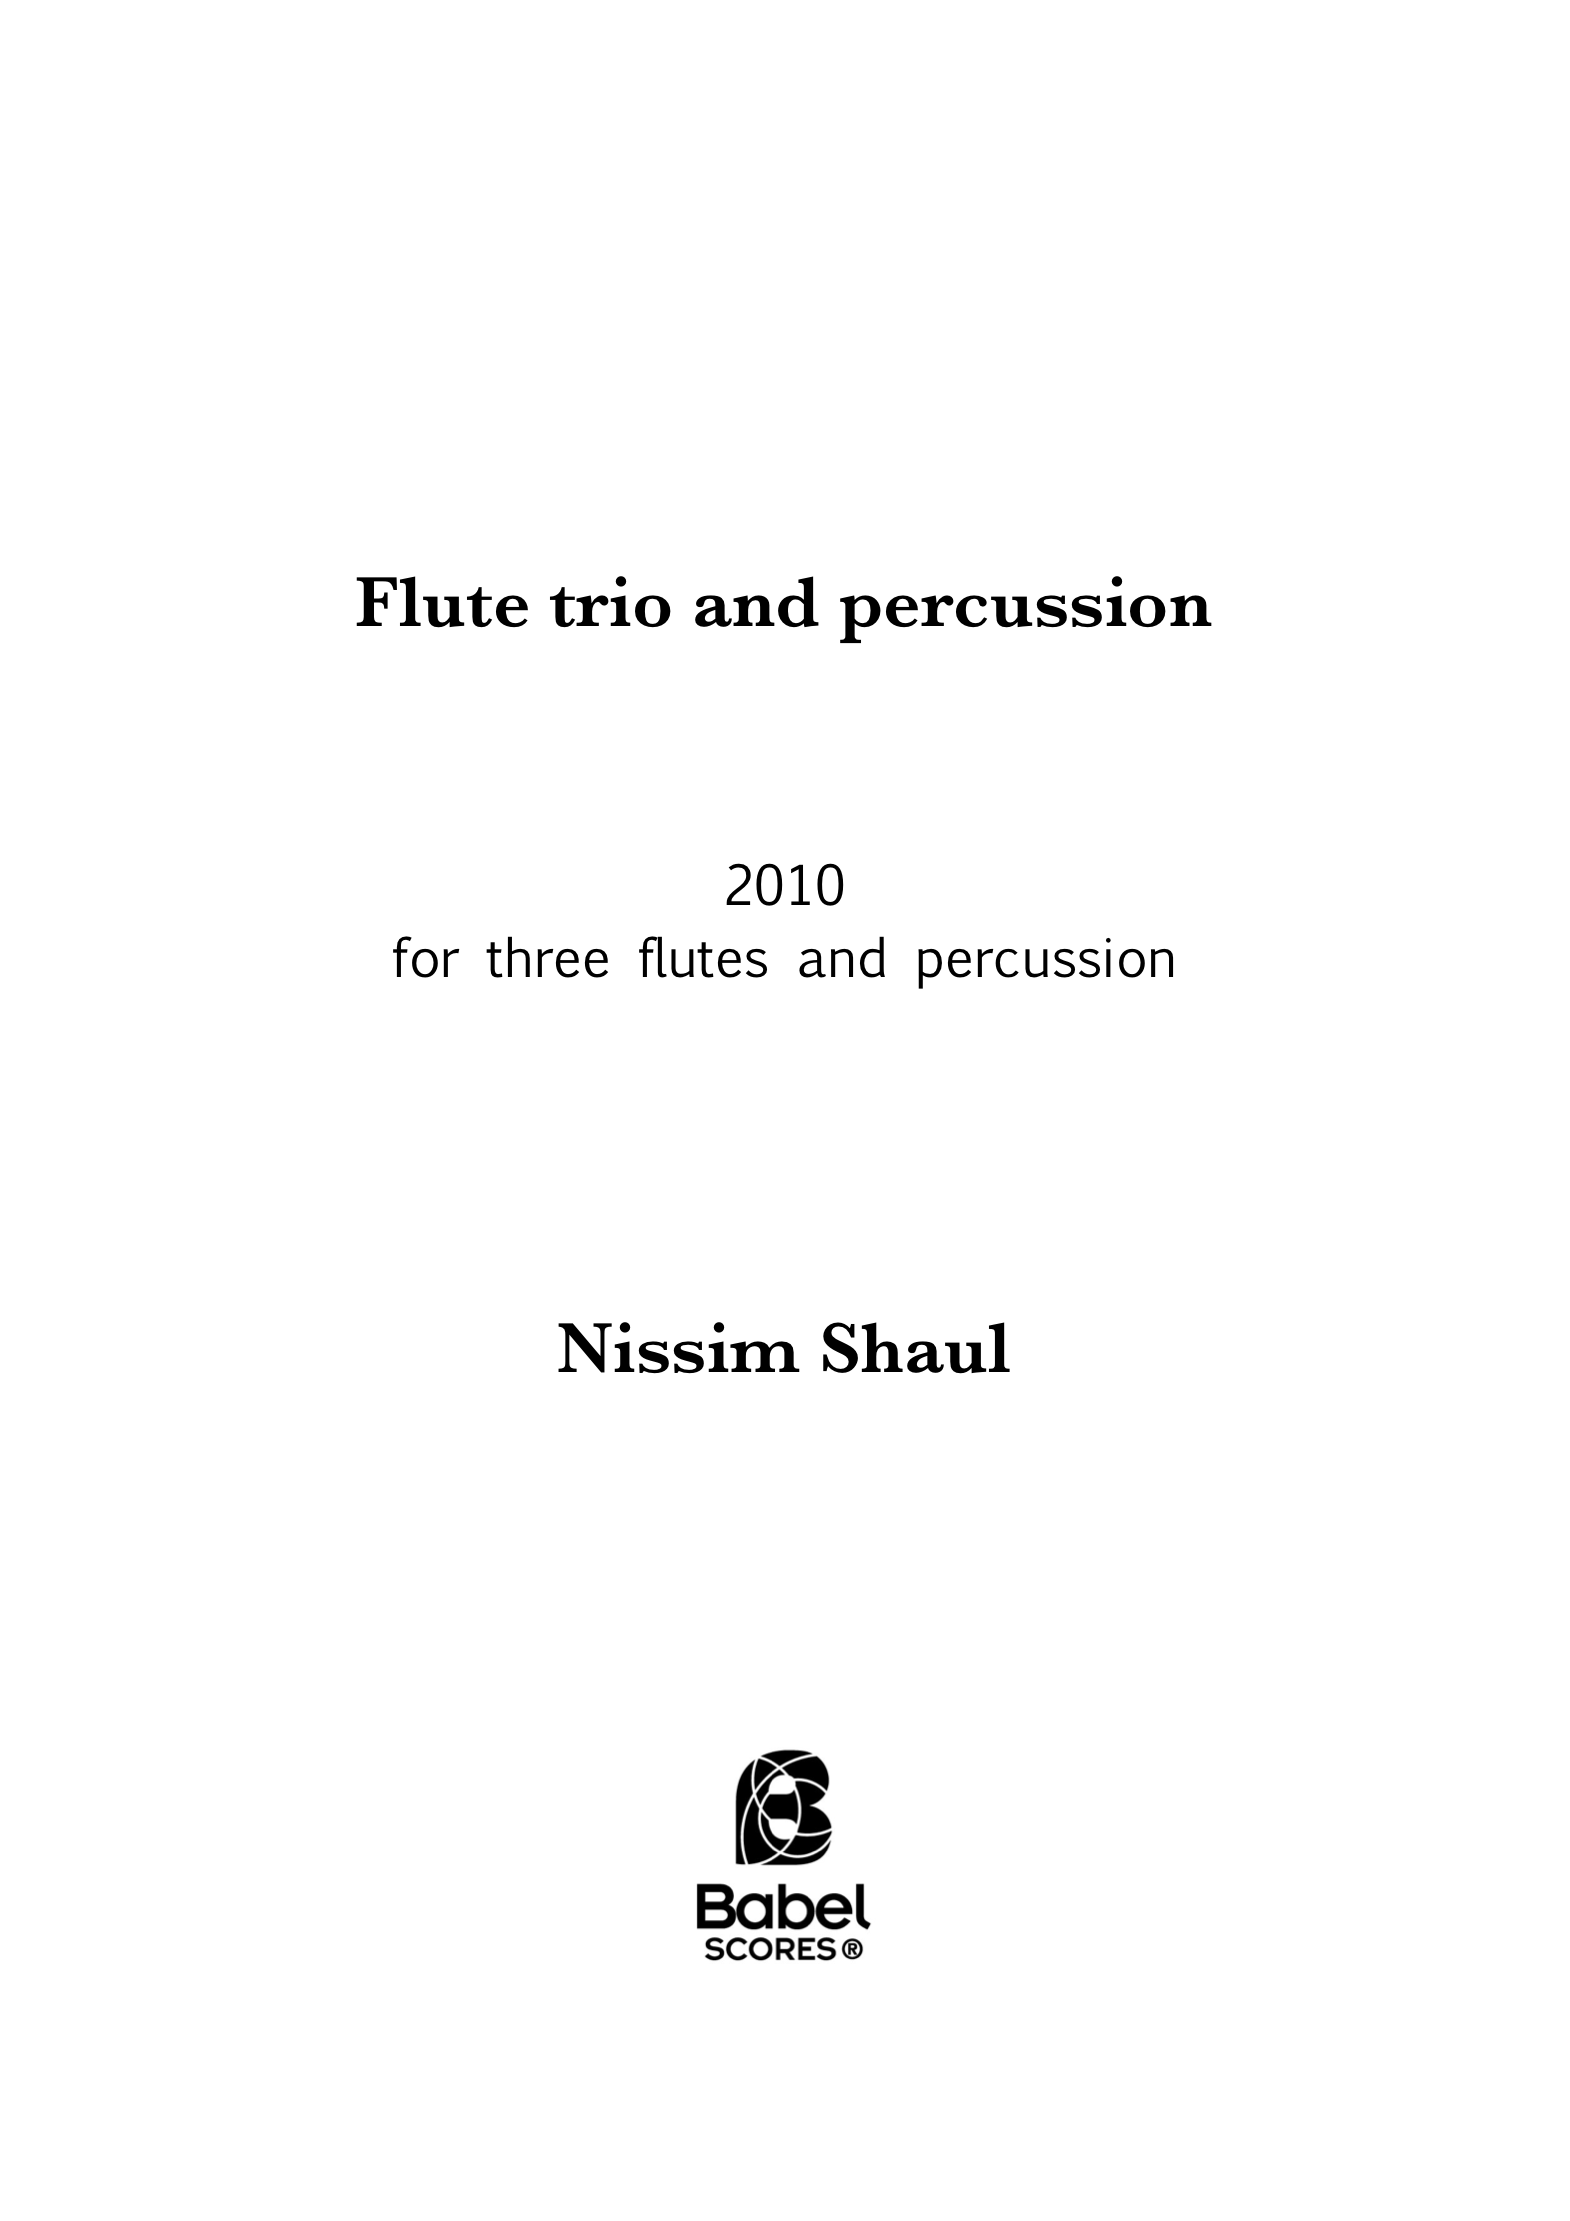 FluteTriowithPercussion_BS